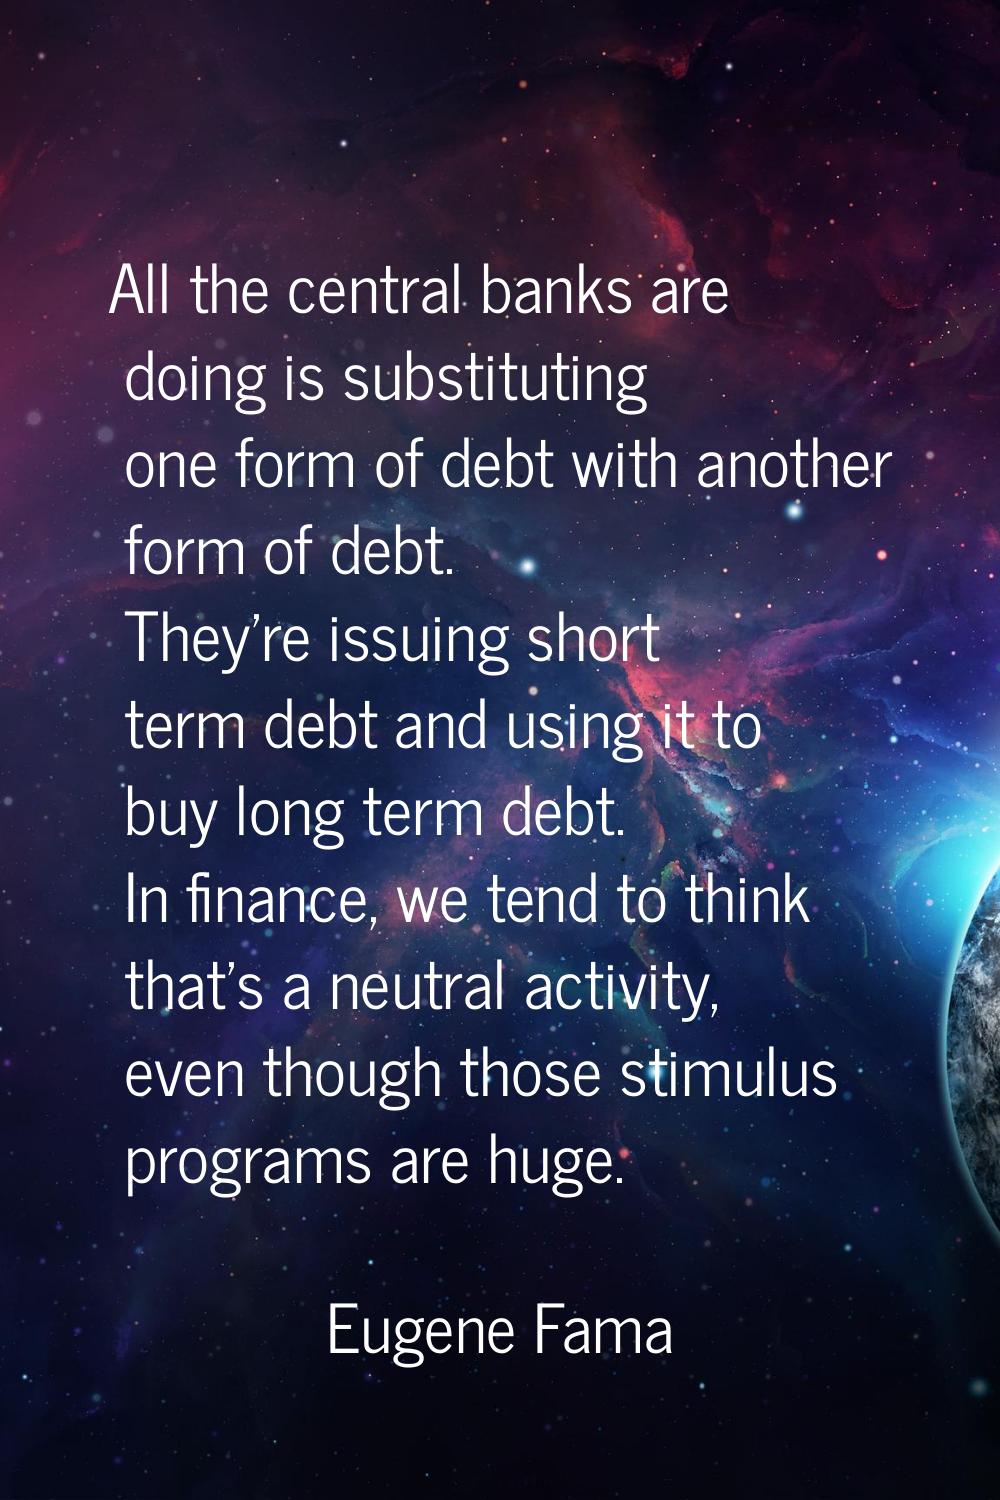 All the central banks are doing is substituting one form of debt with another form of debt. They're